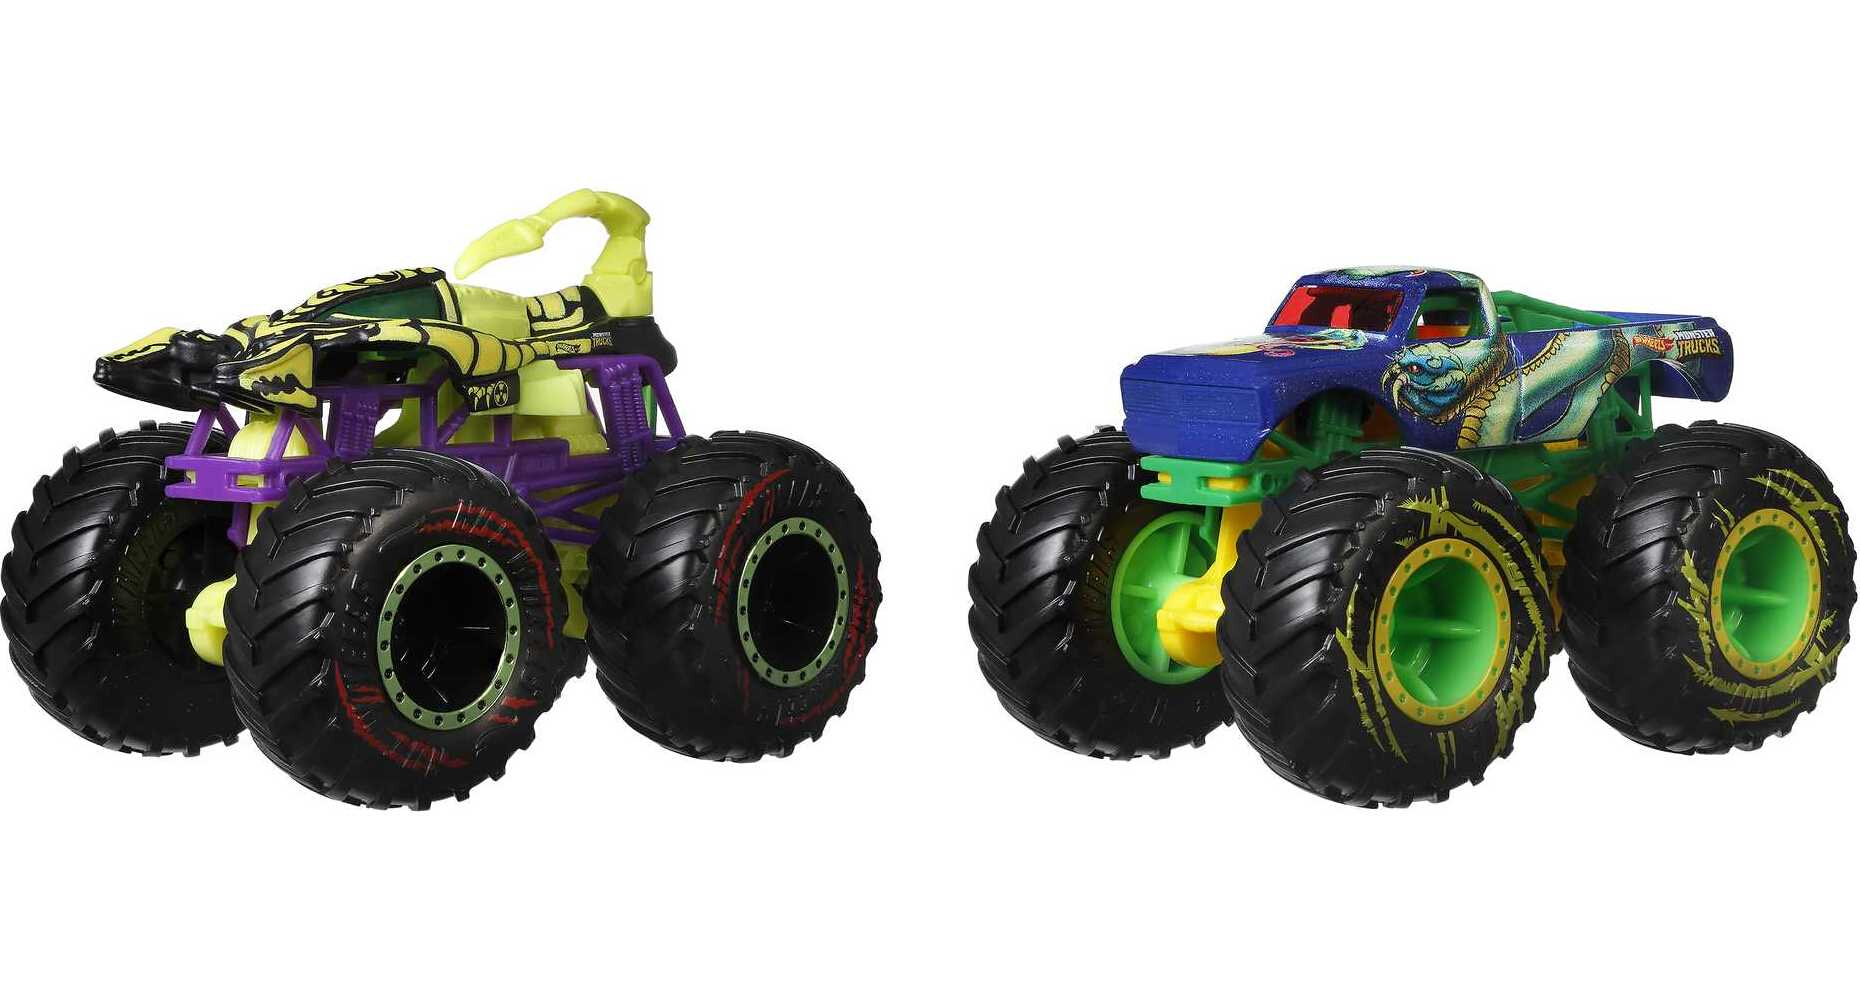 Hot Wheels Monster Trucks Roarin' Rumble 2-Pack of 1:64 Scale Toy Trucks (Styles May Vary) - image 4 of 4